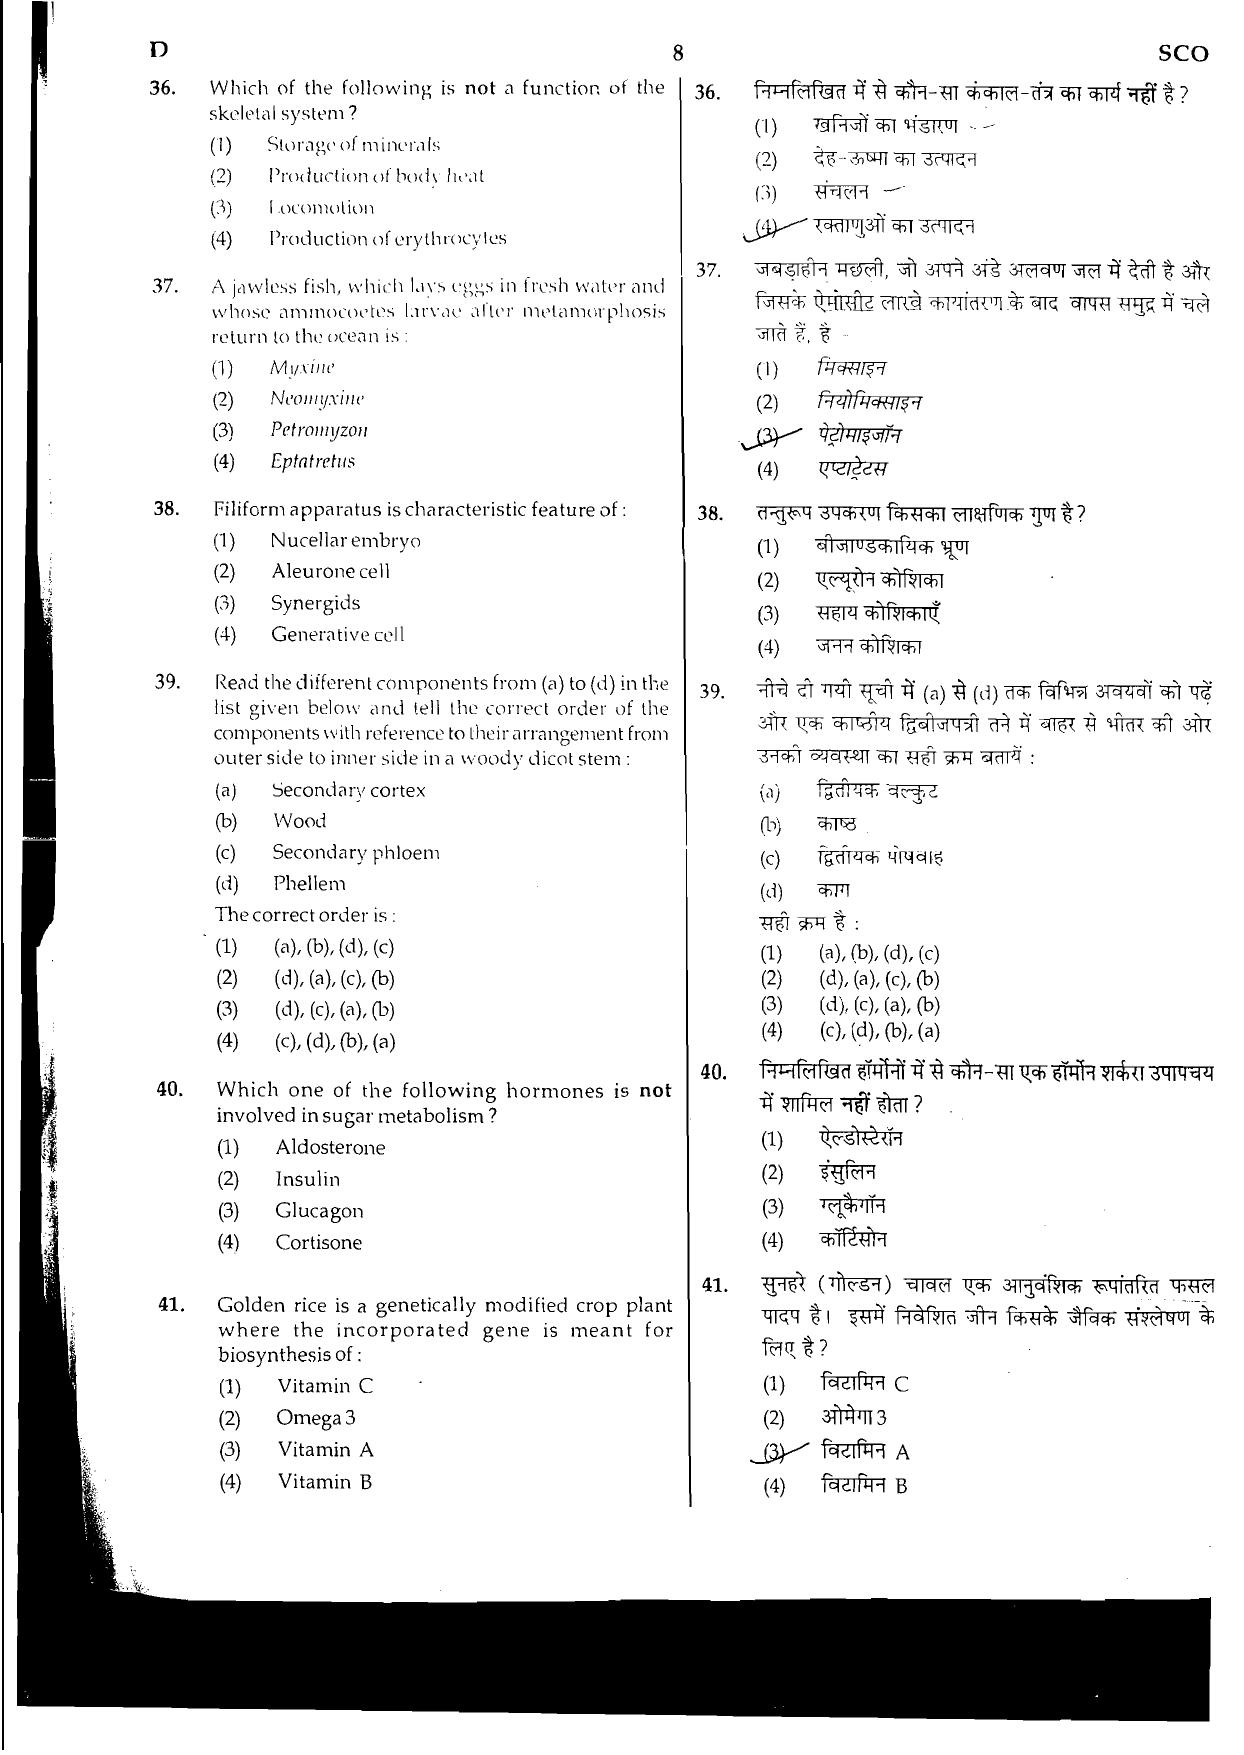 NEET Code D 2015 Question Paper - Page 8